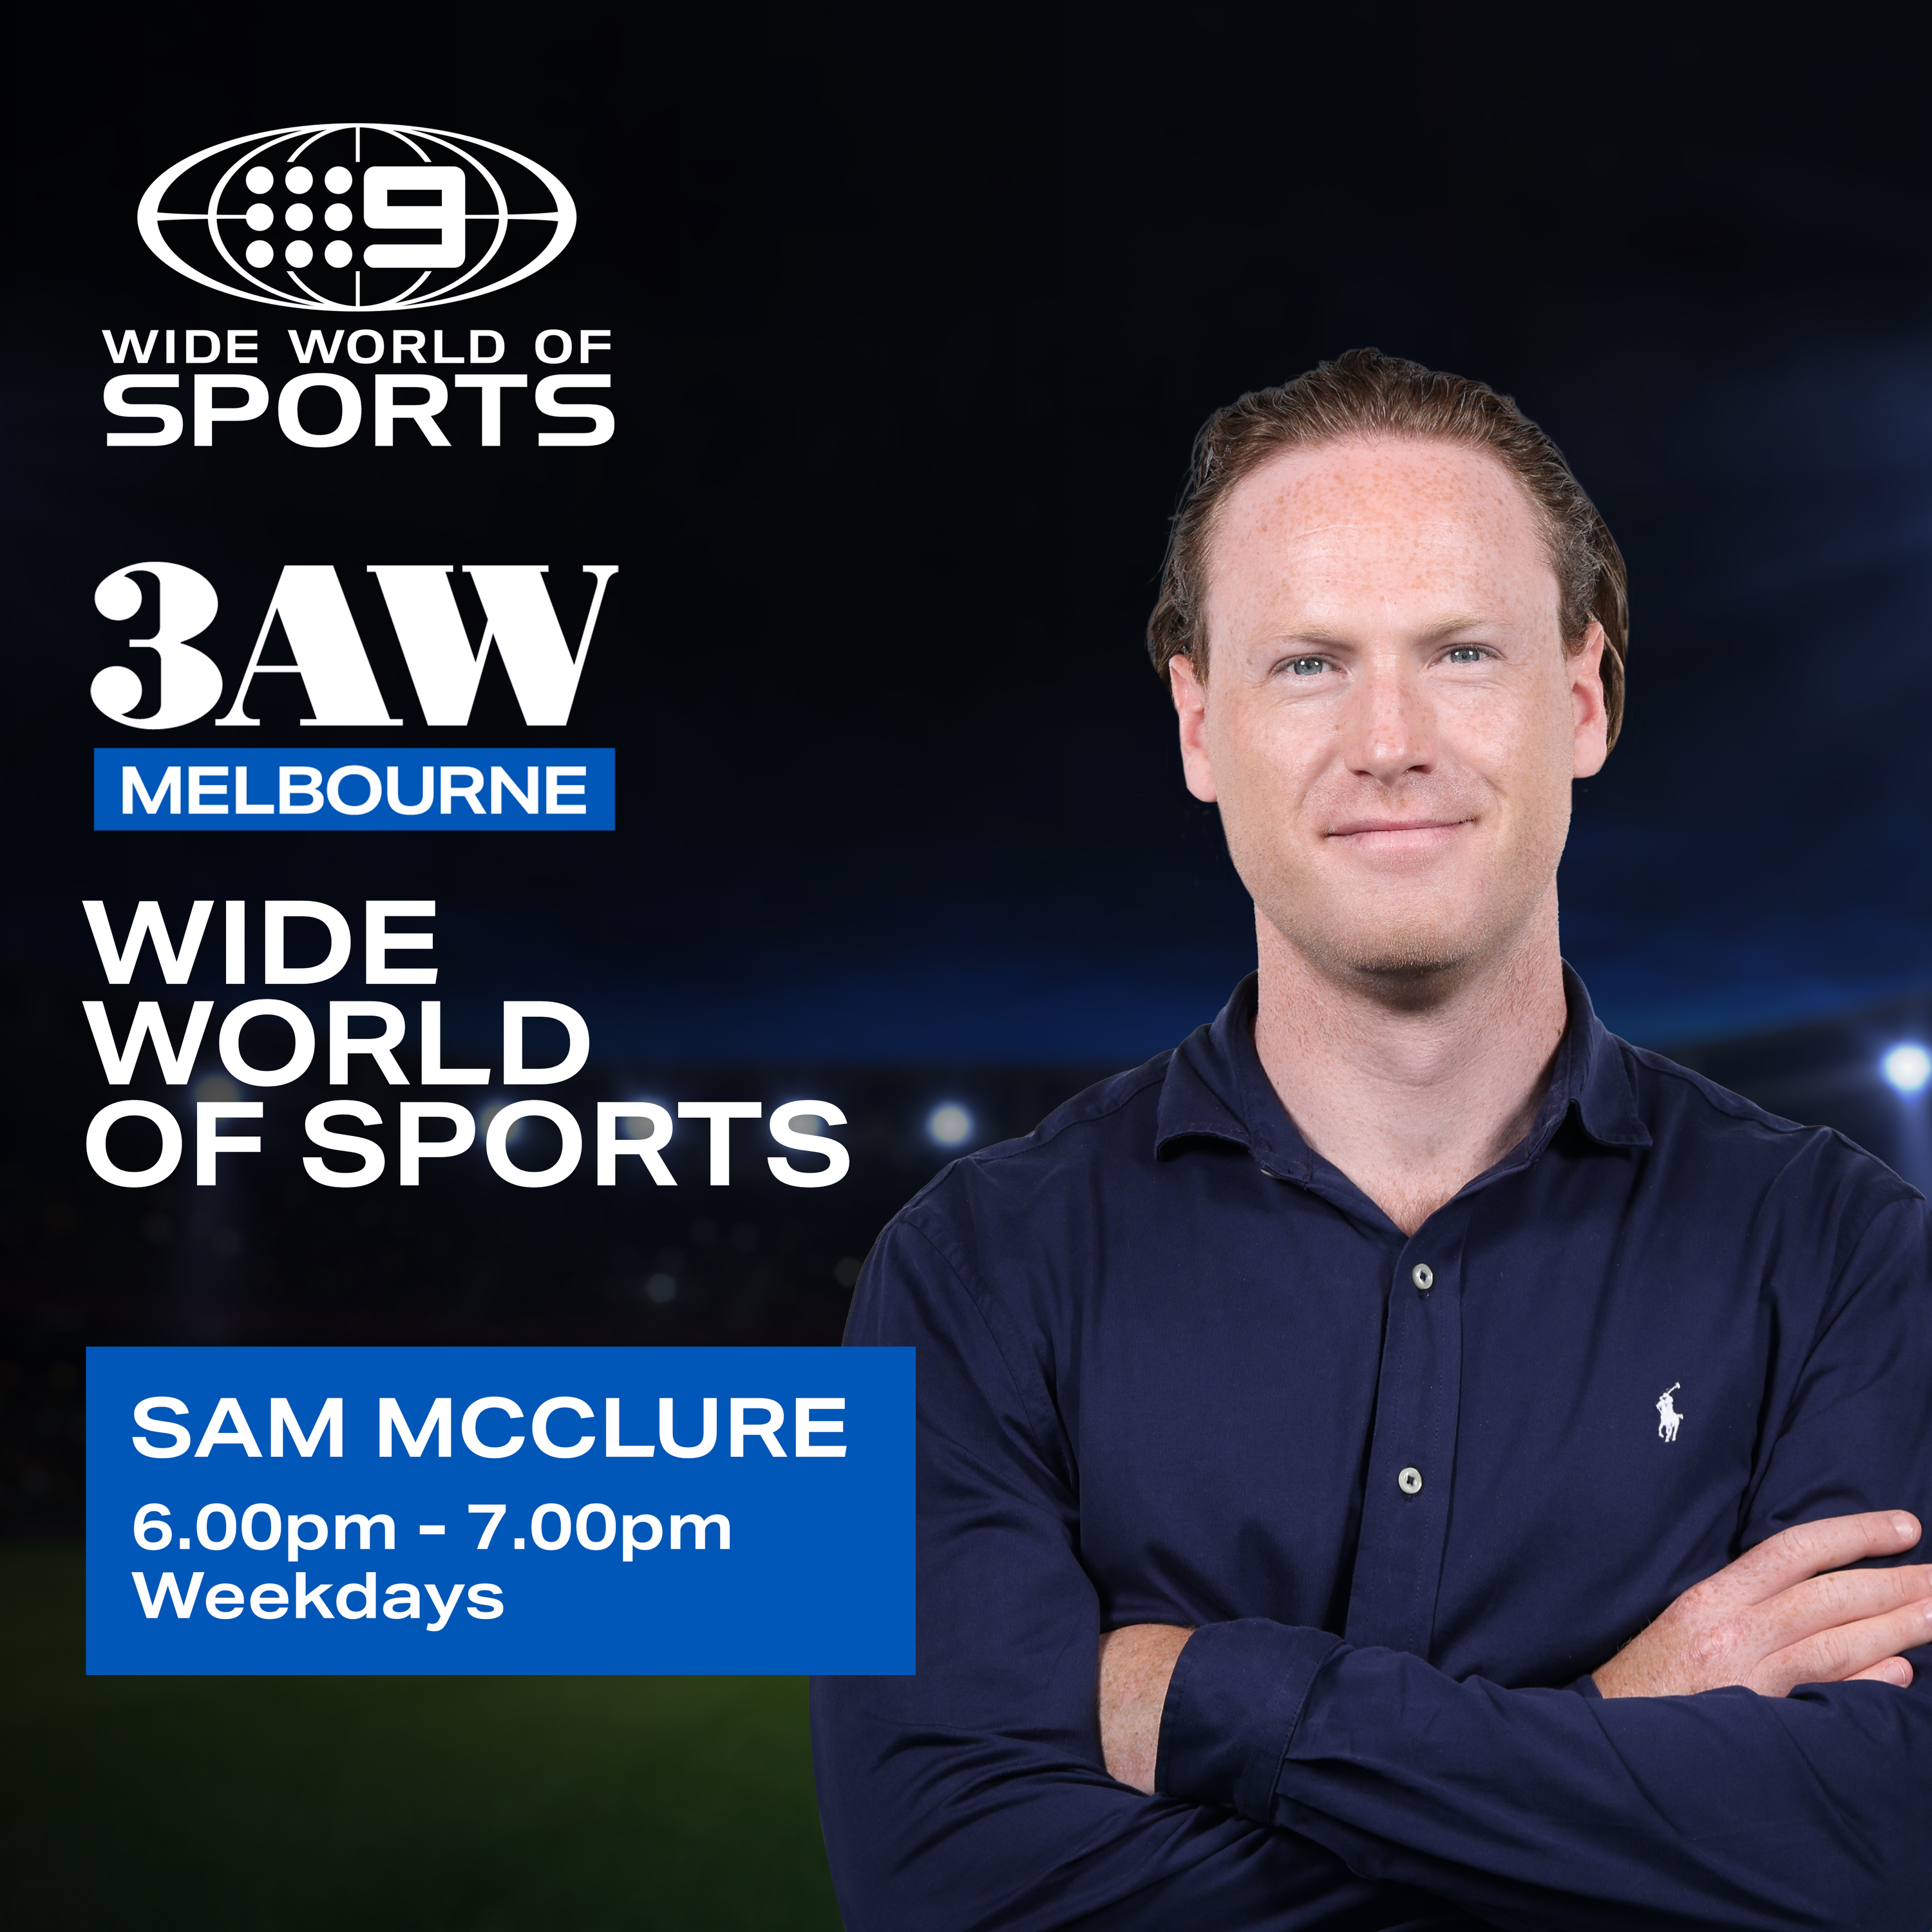 Sam McClure's report on the out of contract player being offered HUGE money by four clubs